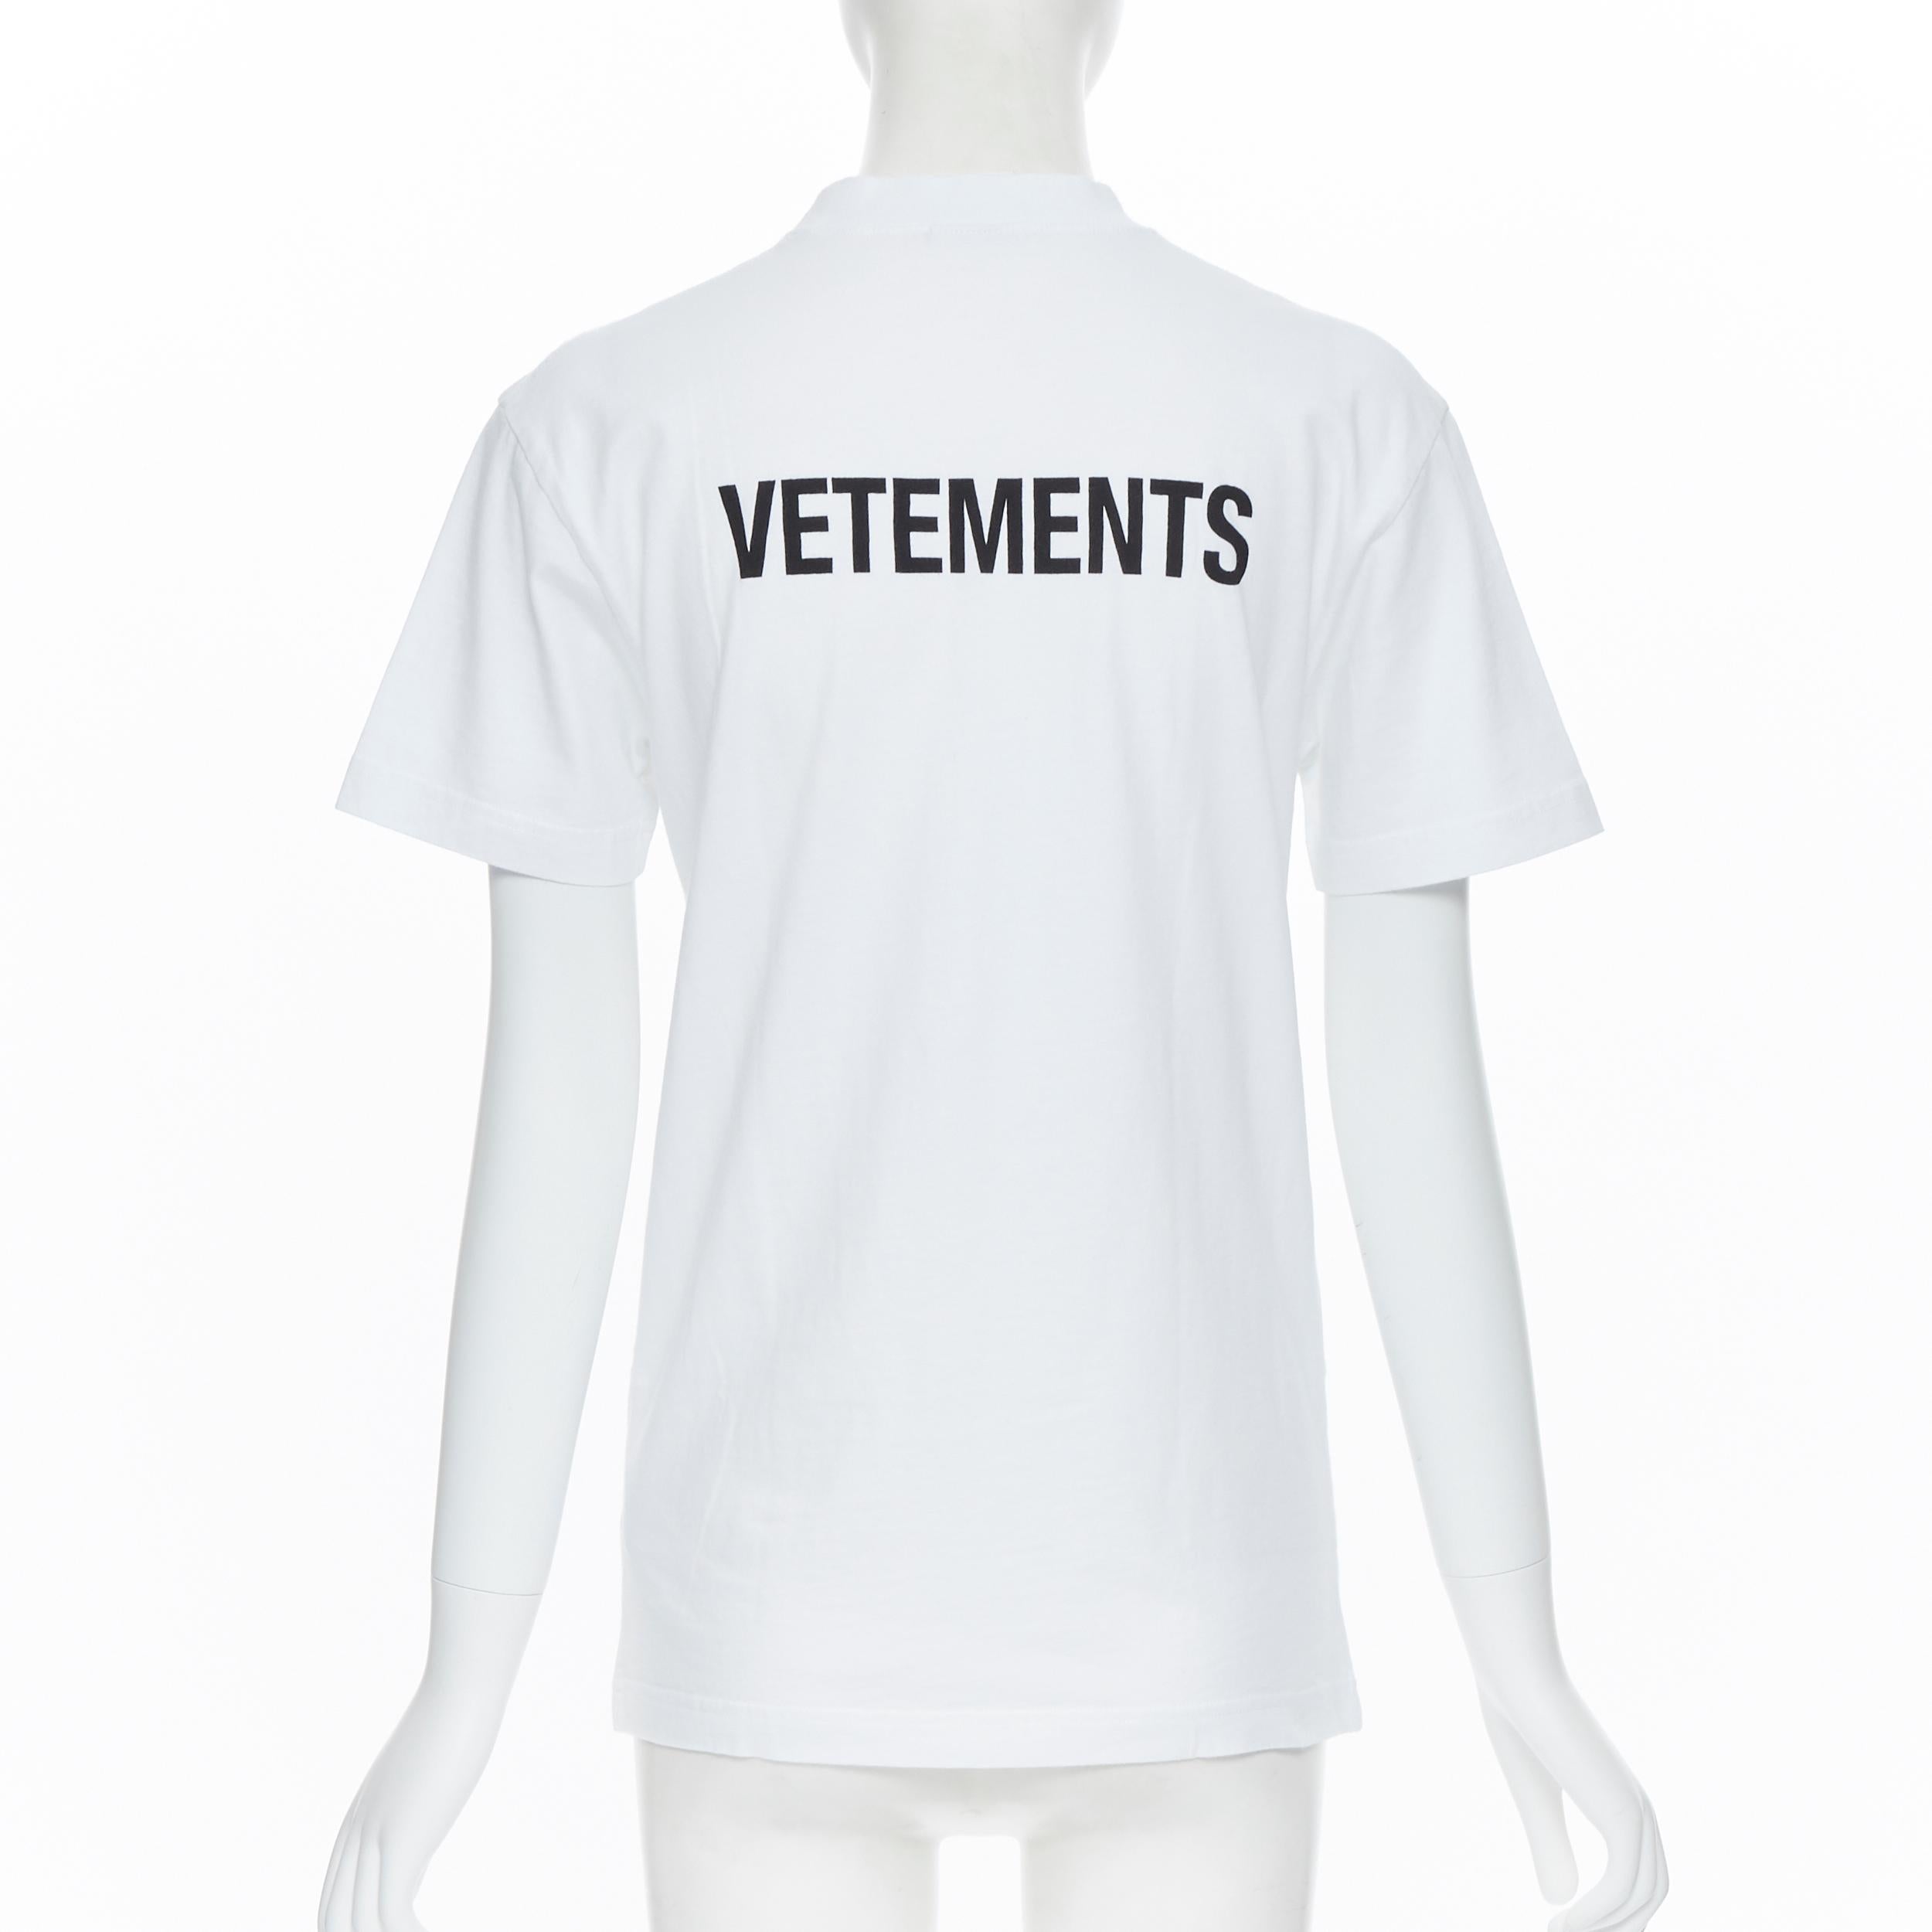 VETEMENTS AW18 gold STAFF logo print short sleeve t-shirt XS
Brand: Vetements
Designer: Demna Gvasalia
Collection: Fall 2018
Model Name / Style: Logo tshirt
Material: Cotton
Color: White
Pattern: Solid
Extra Detail: Logo print on back.
Made in: